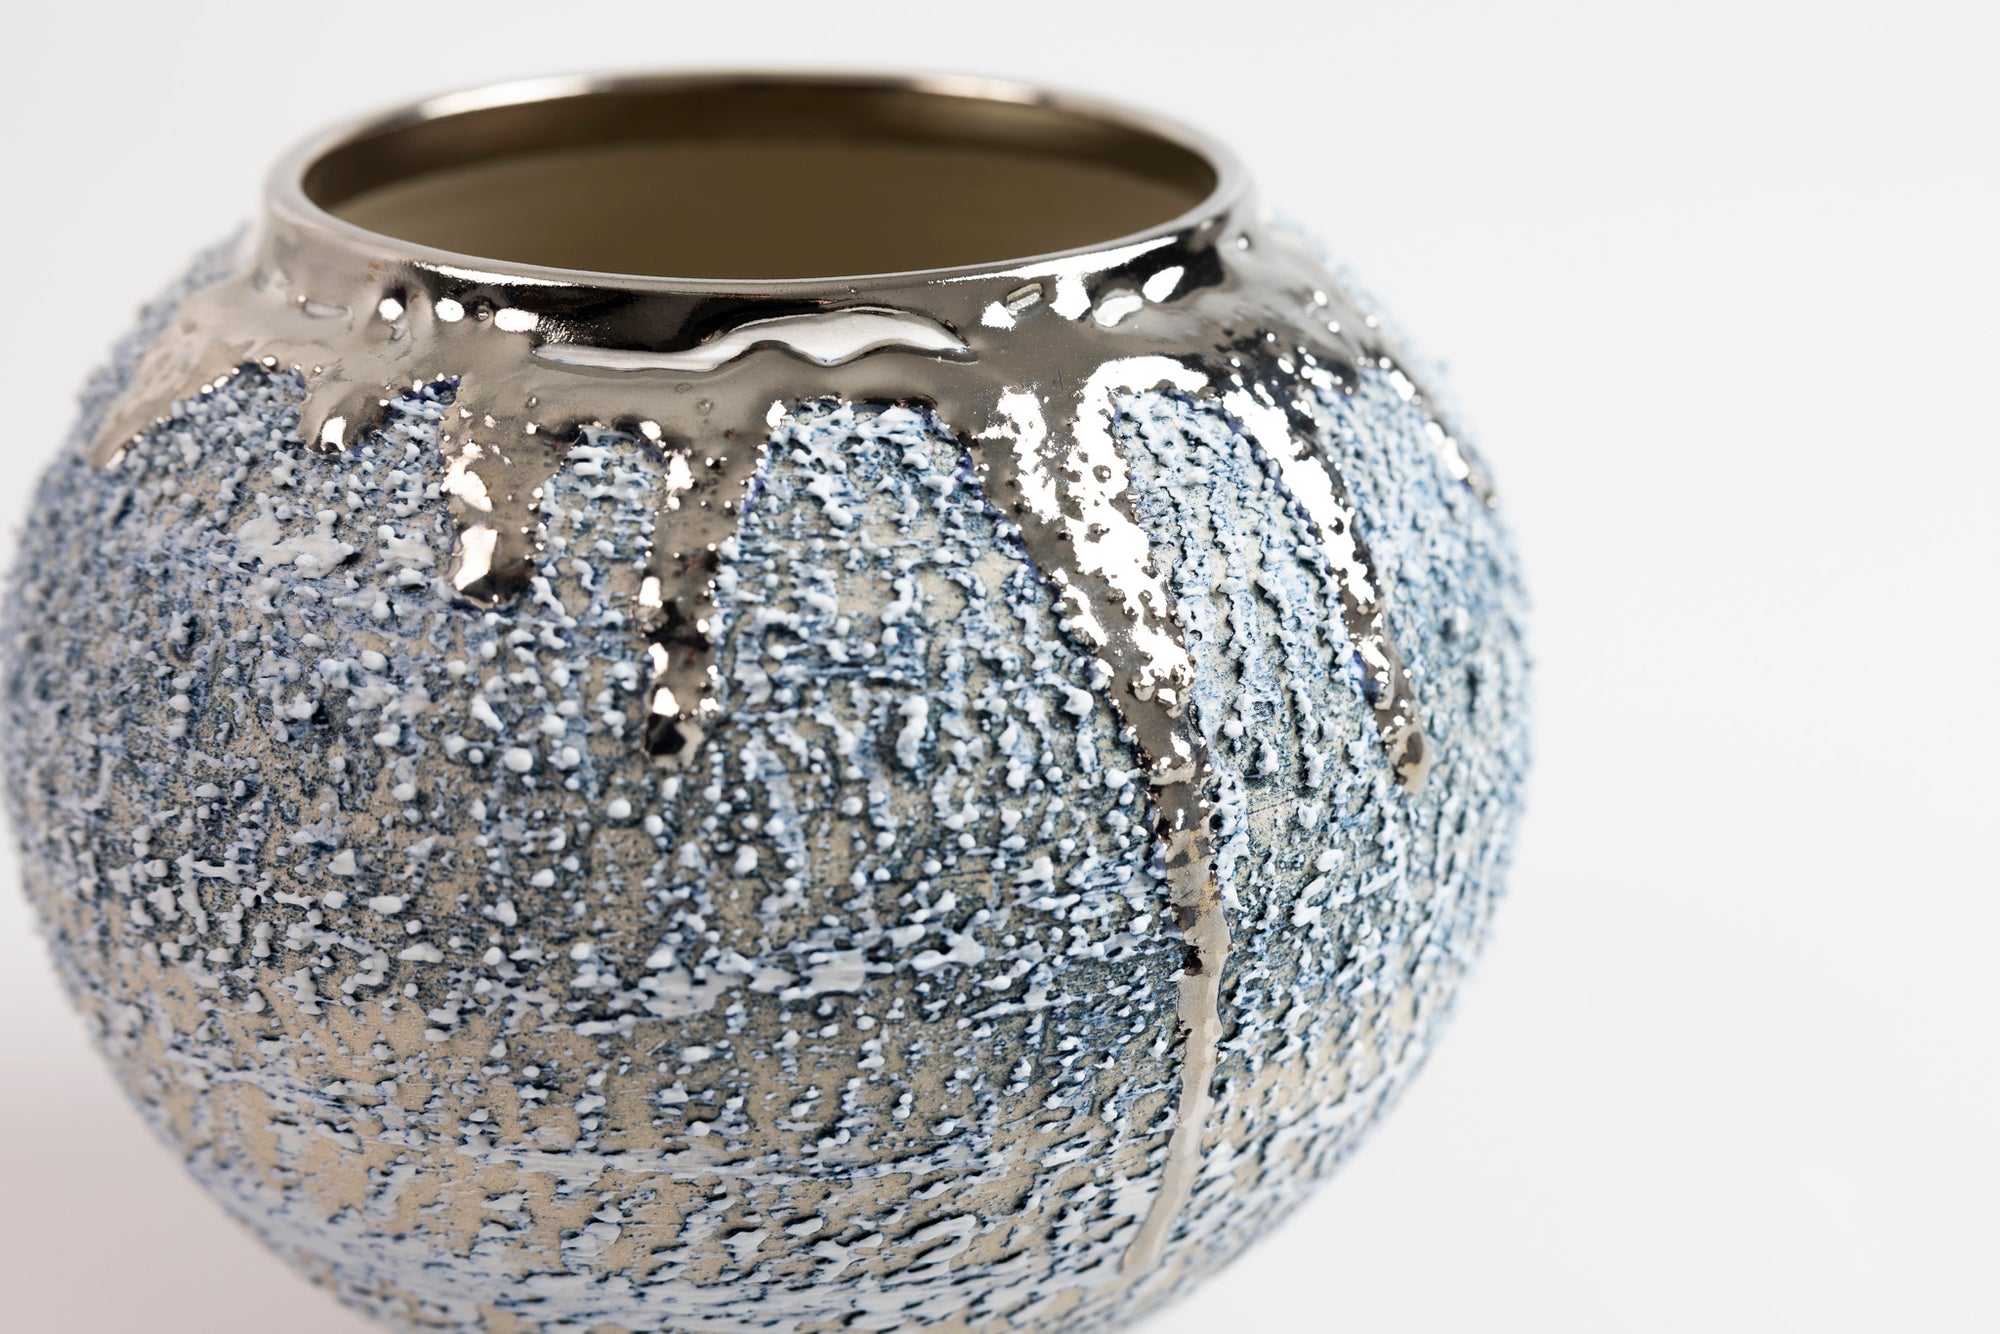 Textured moon jar with platinum lustre, by Alex McCarthy, available from Padstow Gallery, Cornwall